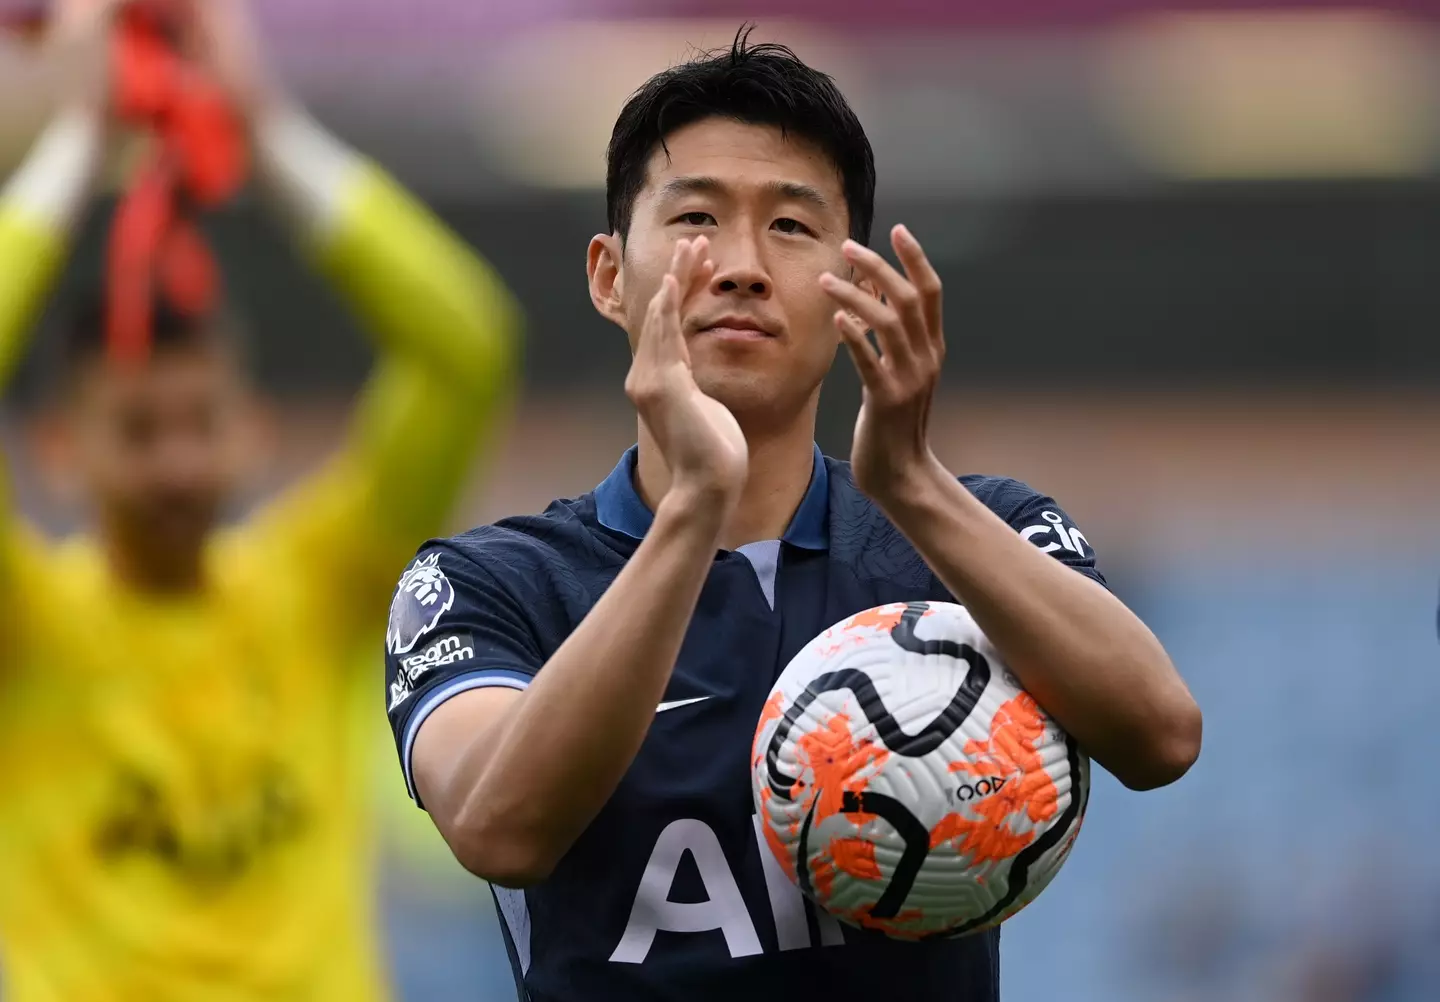 Son Heung-min takes home the match ball after scoring a hat-trick. Image: Getty